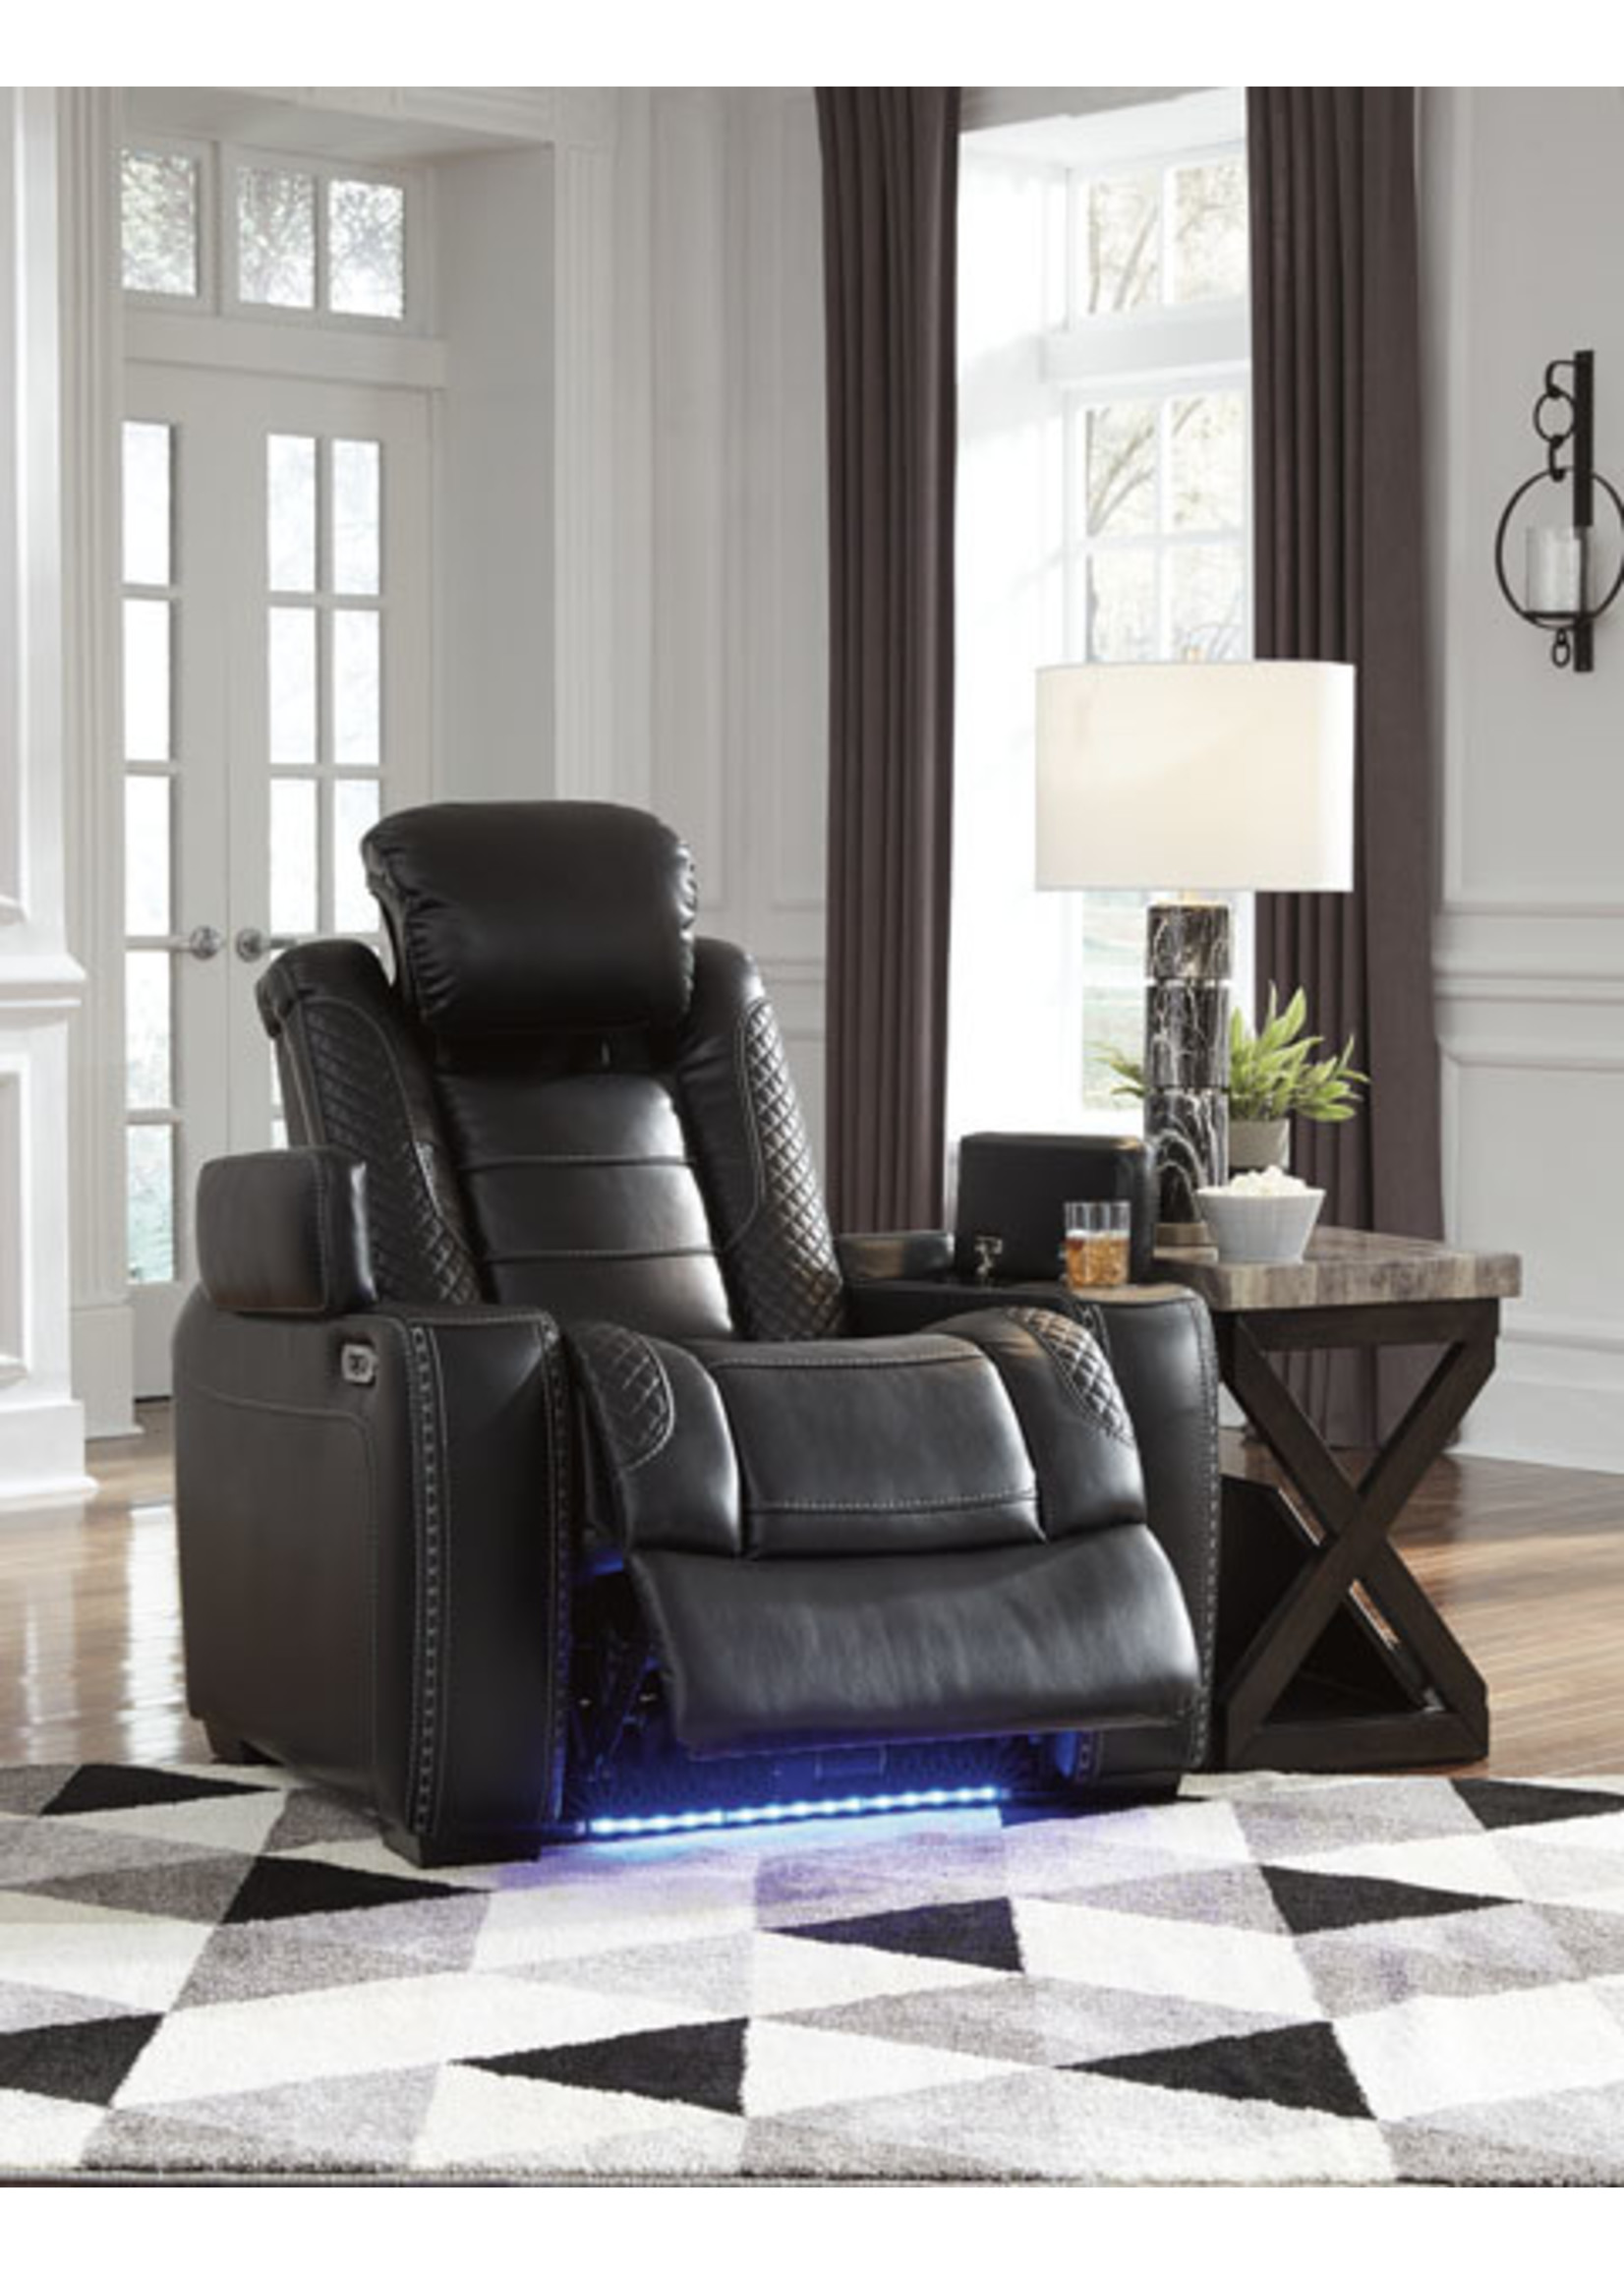 ASHLEY PARTY TIME POWER RECLINER BLACK W/LIGHTS